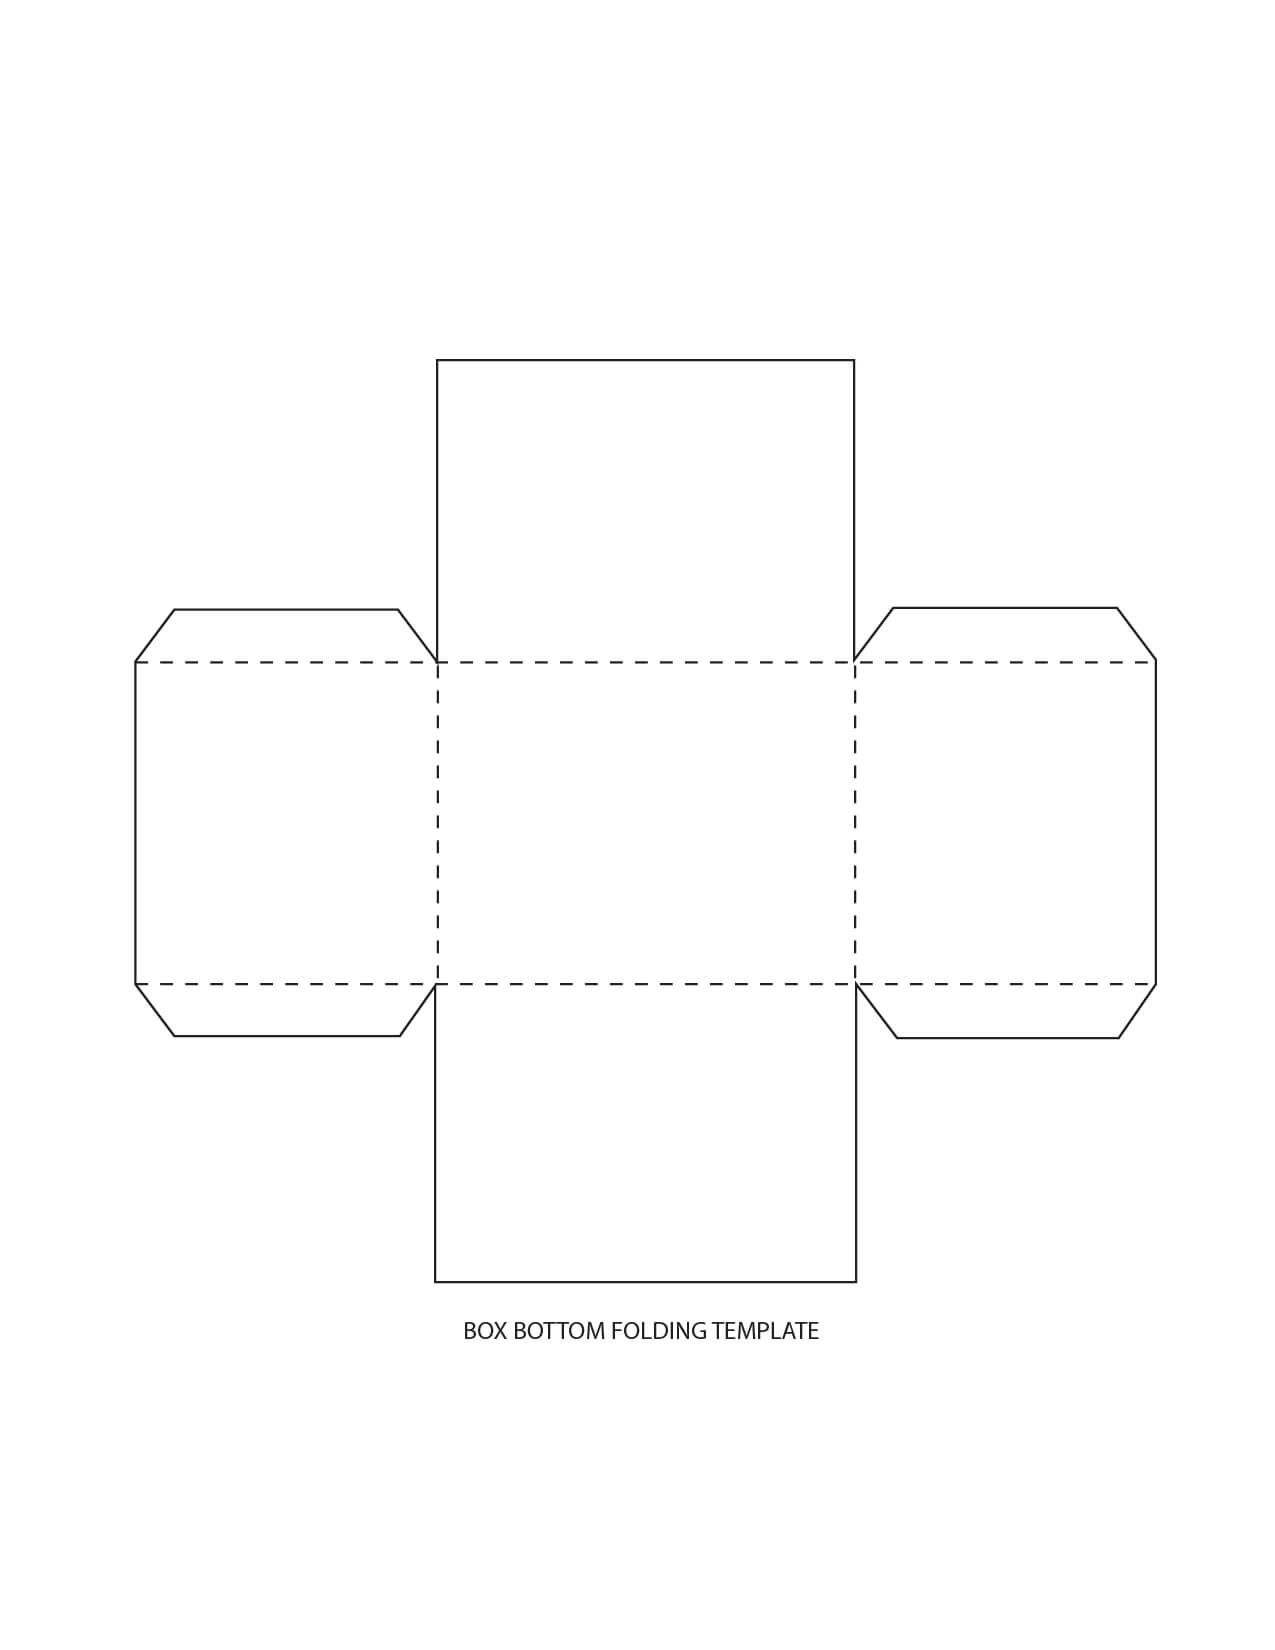 View Source Image | Box Template Printable, Cookie Box Throughout Card Box Template Generator